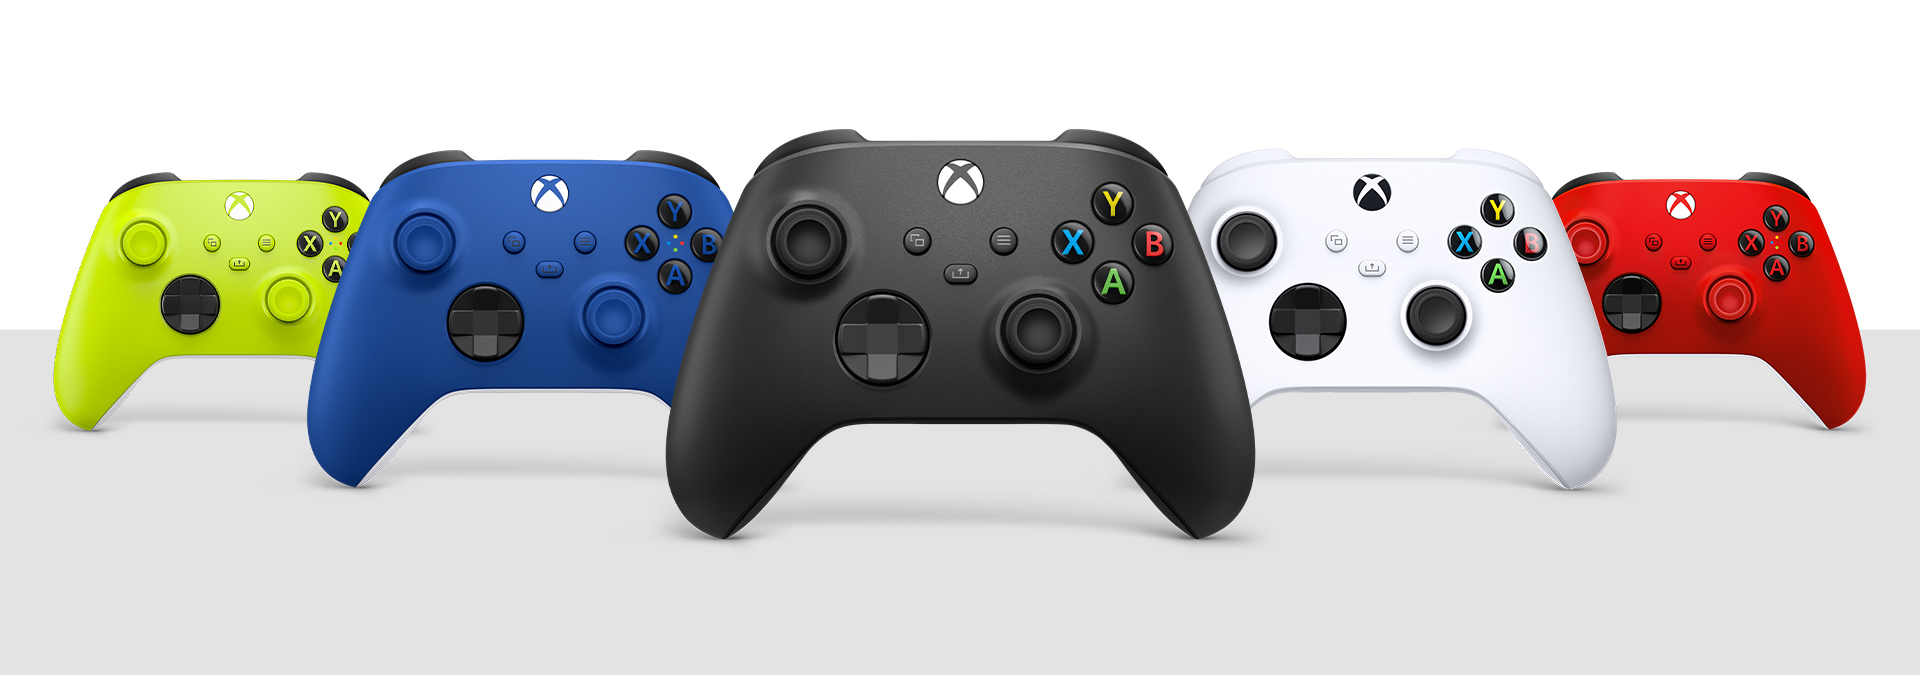 Xbox Wireless Controller Carbon Black, Robot White, Shock Blue, Pulse Red and Electric Volt